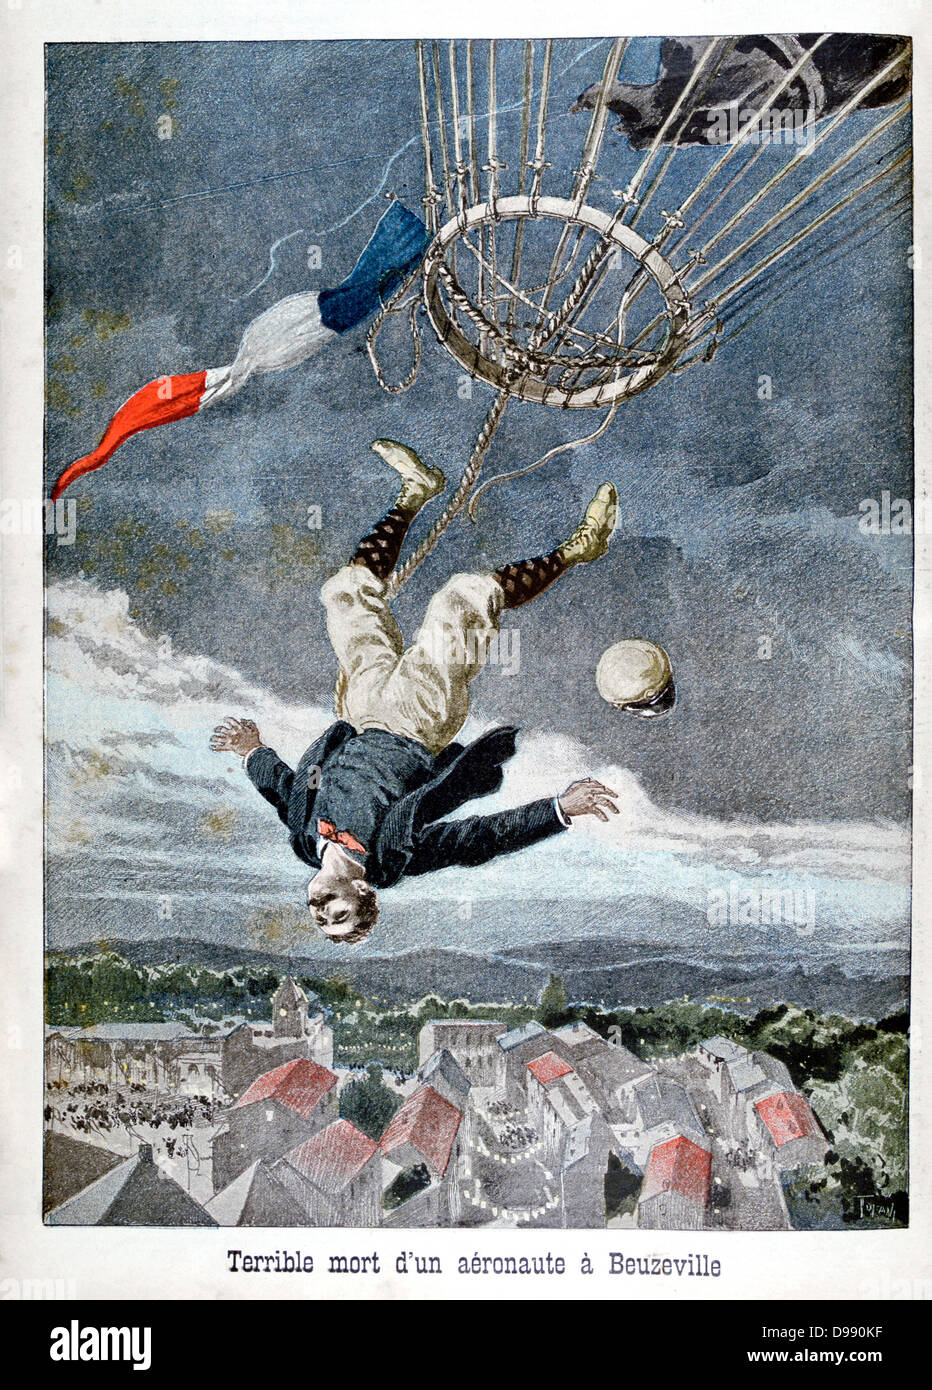 A French aeronaut falling to his death from a balloon over Beuzeville, France. From 'Le Petit Journal' 30 June 1899. Aeronautics Aviation Accident Ballooning Stock Photo